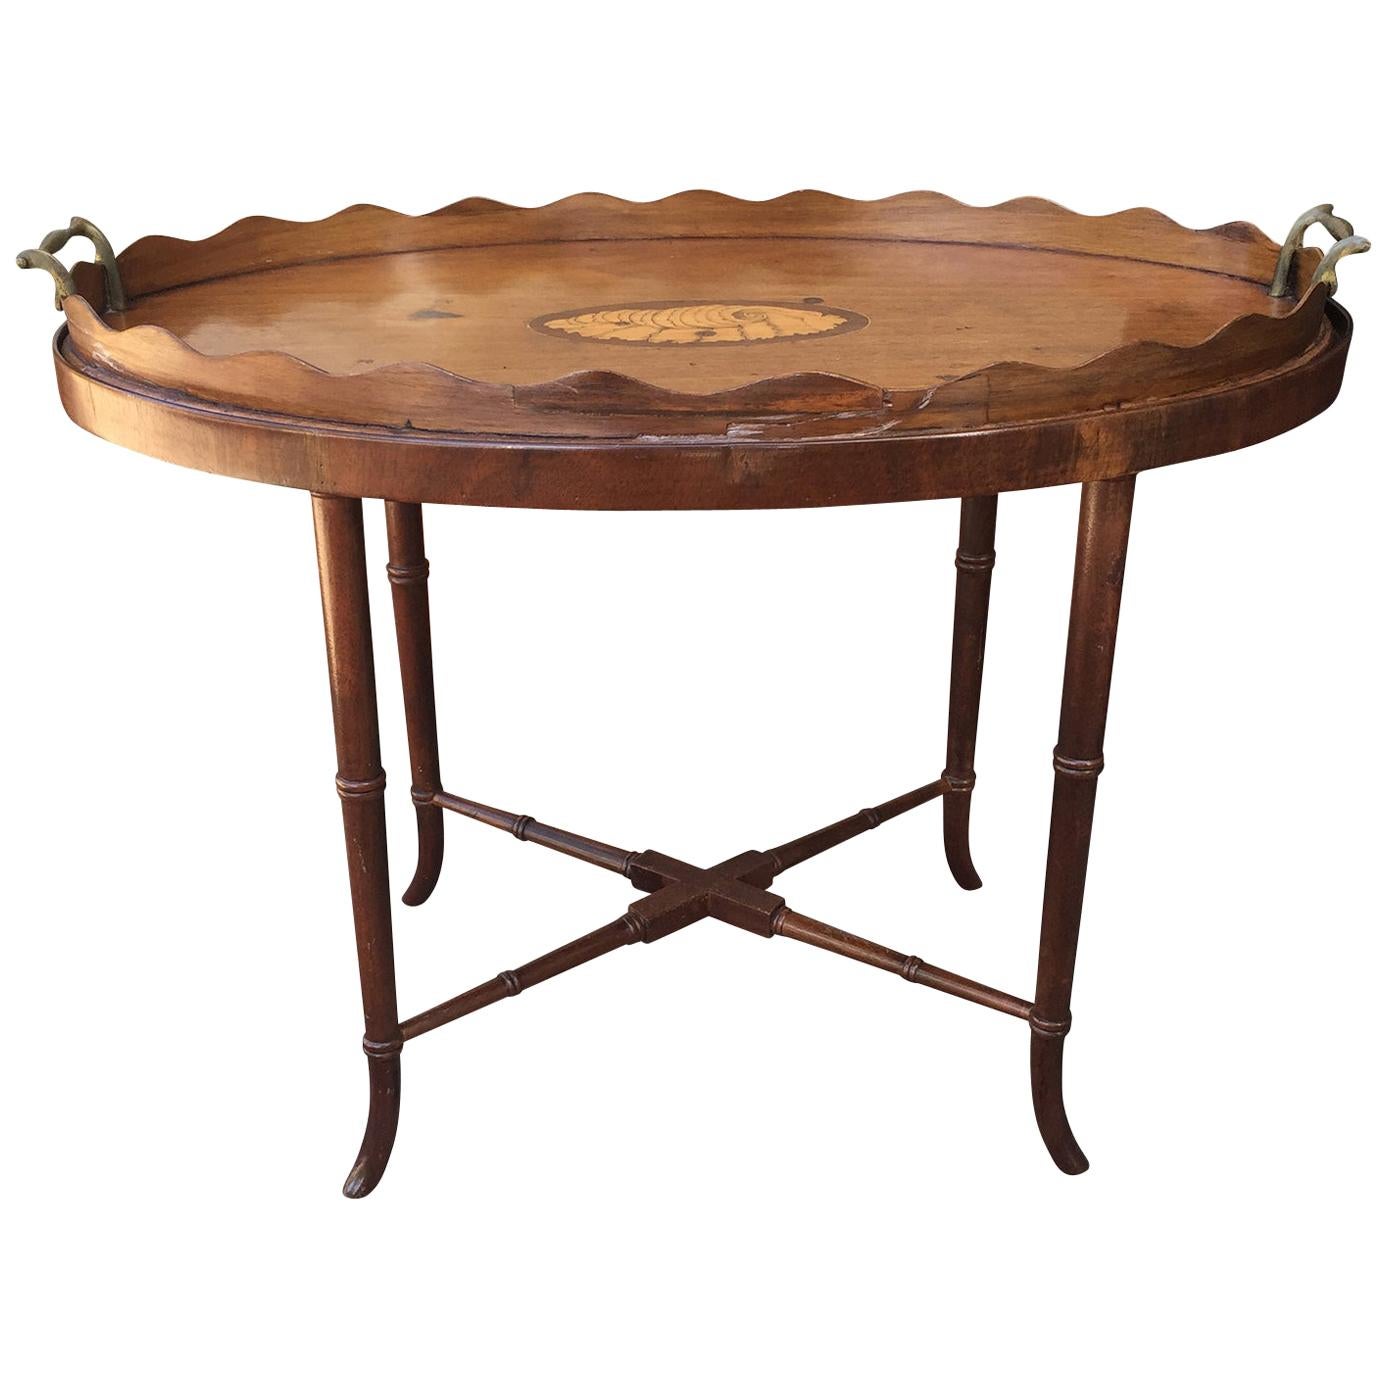 19th-20th Century Georgian Style Tray Table on Stand with Inlaid Shell Motif